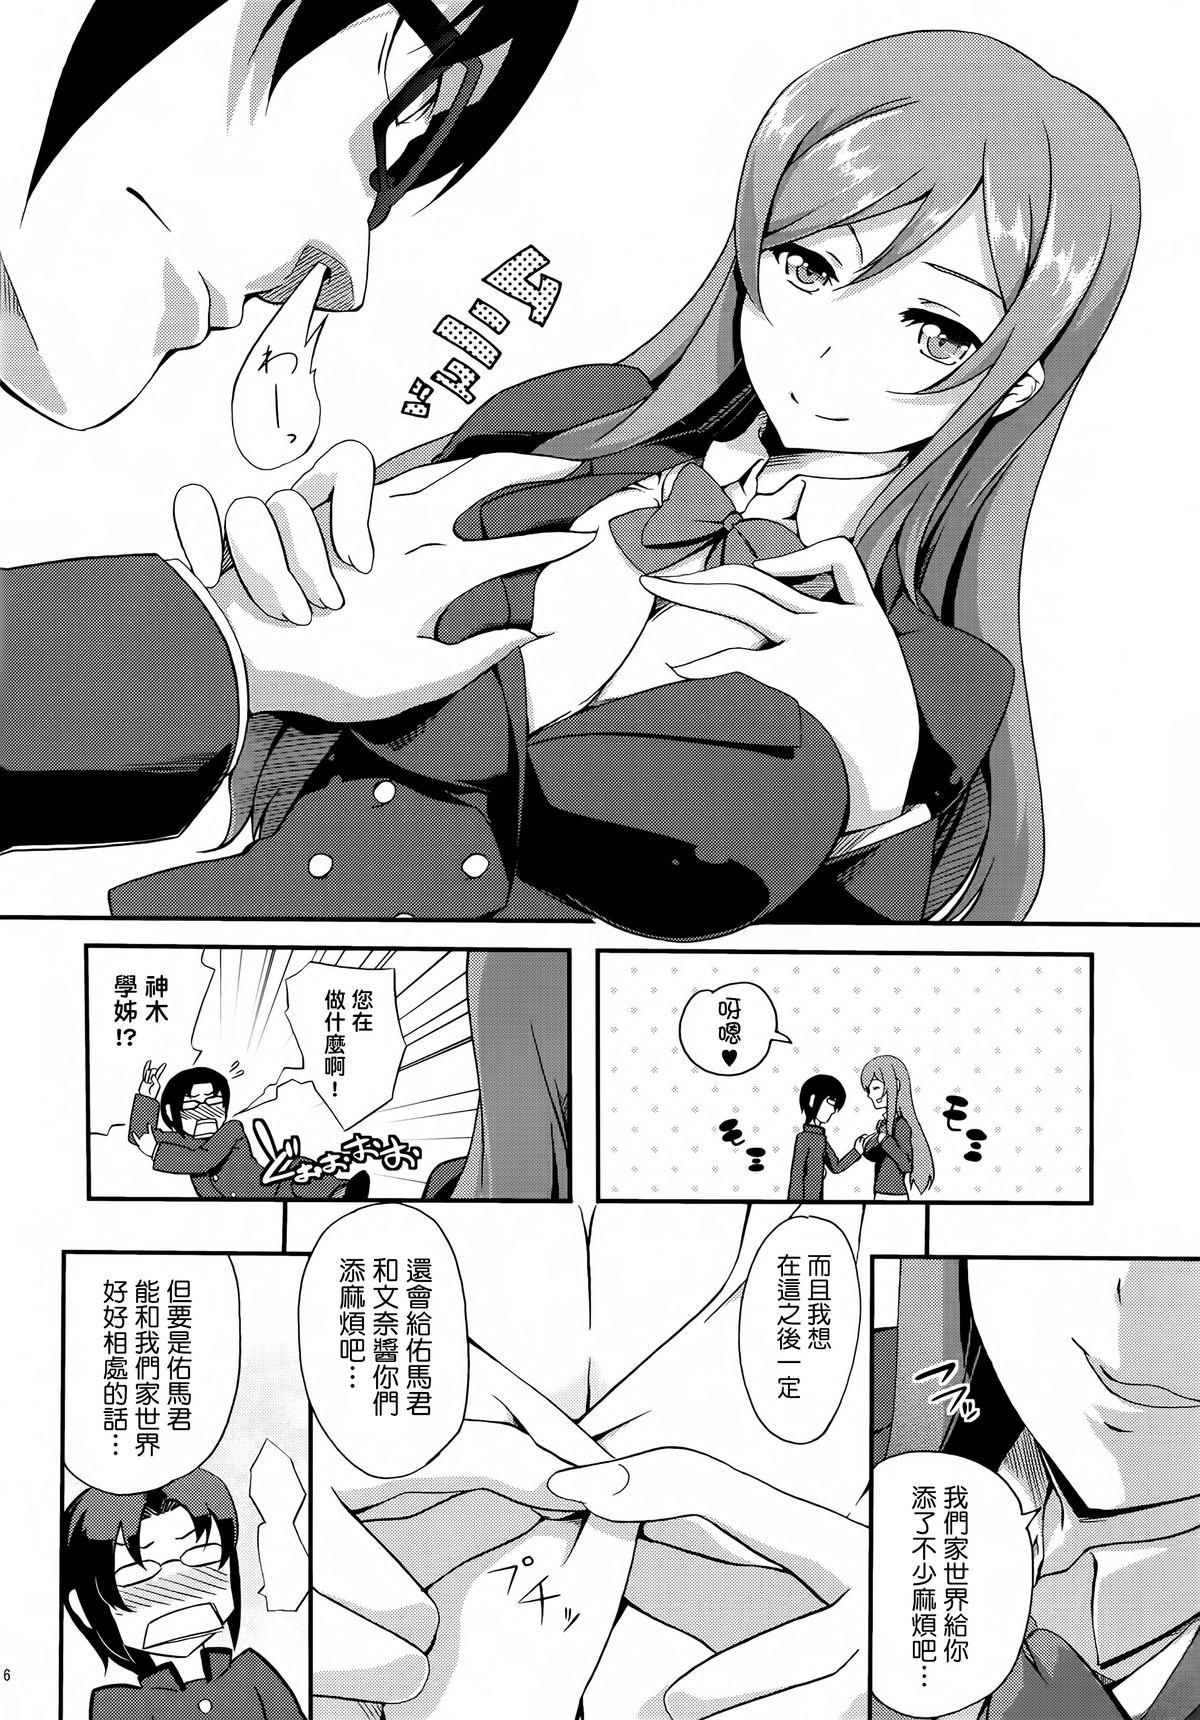 Sixtynine Mirai no Onegai - Gundam build fighters try Rough Sex - Page 6